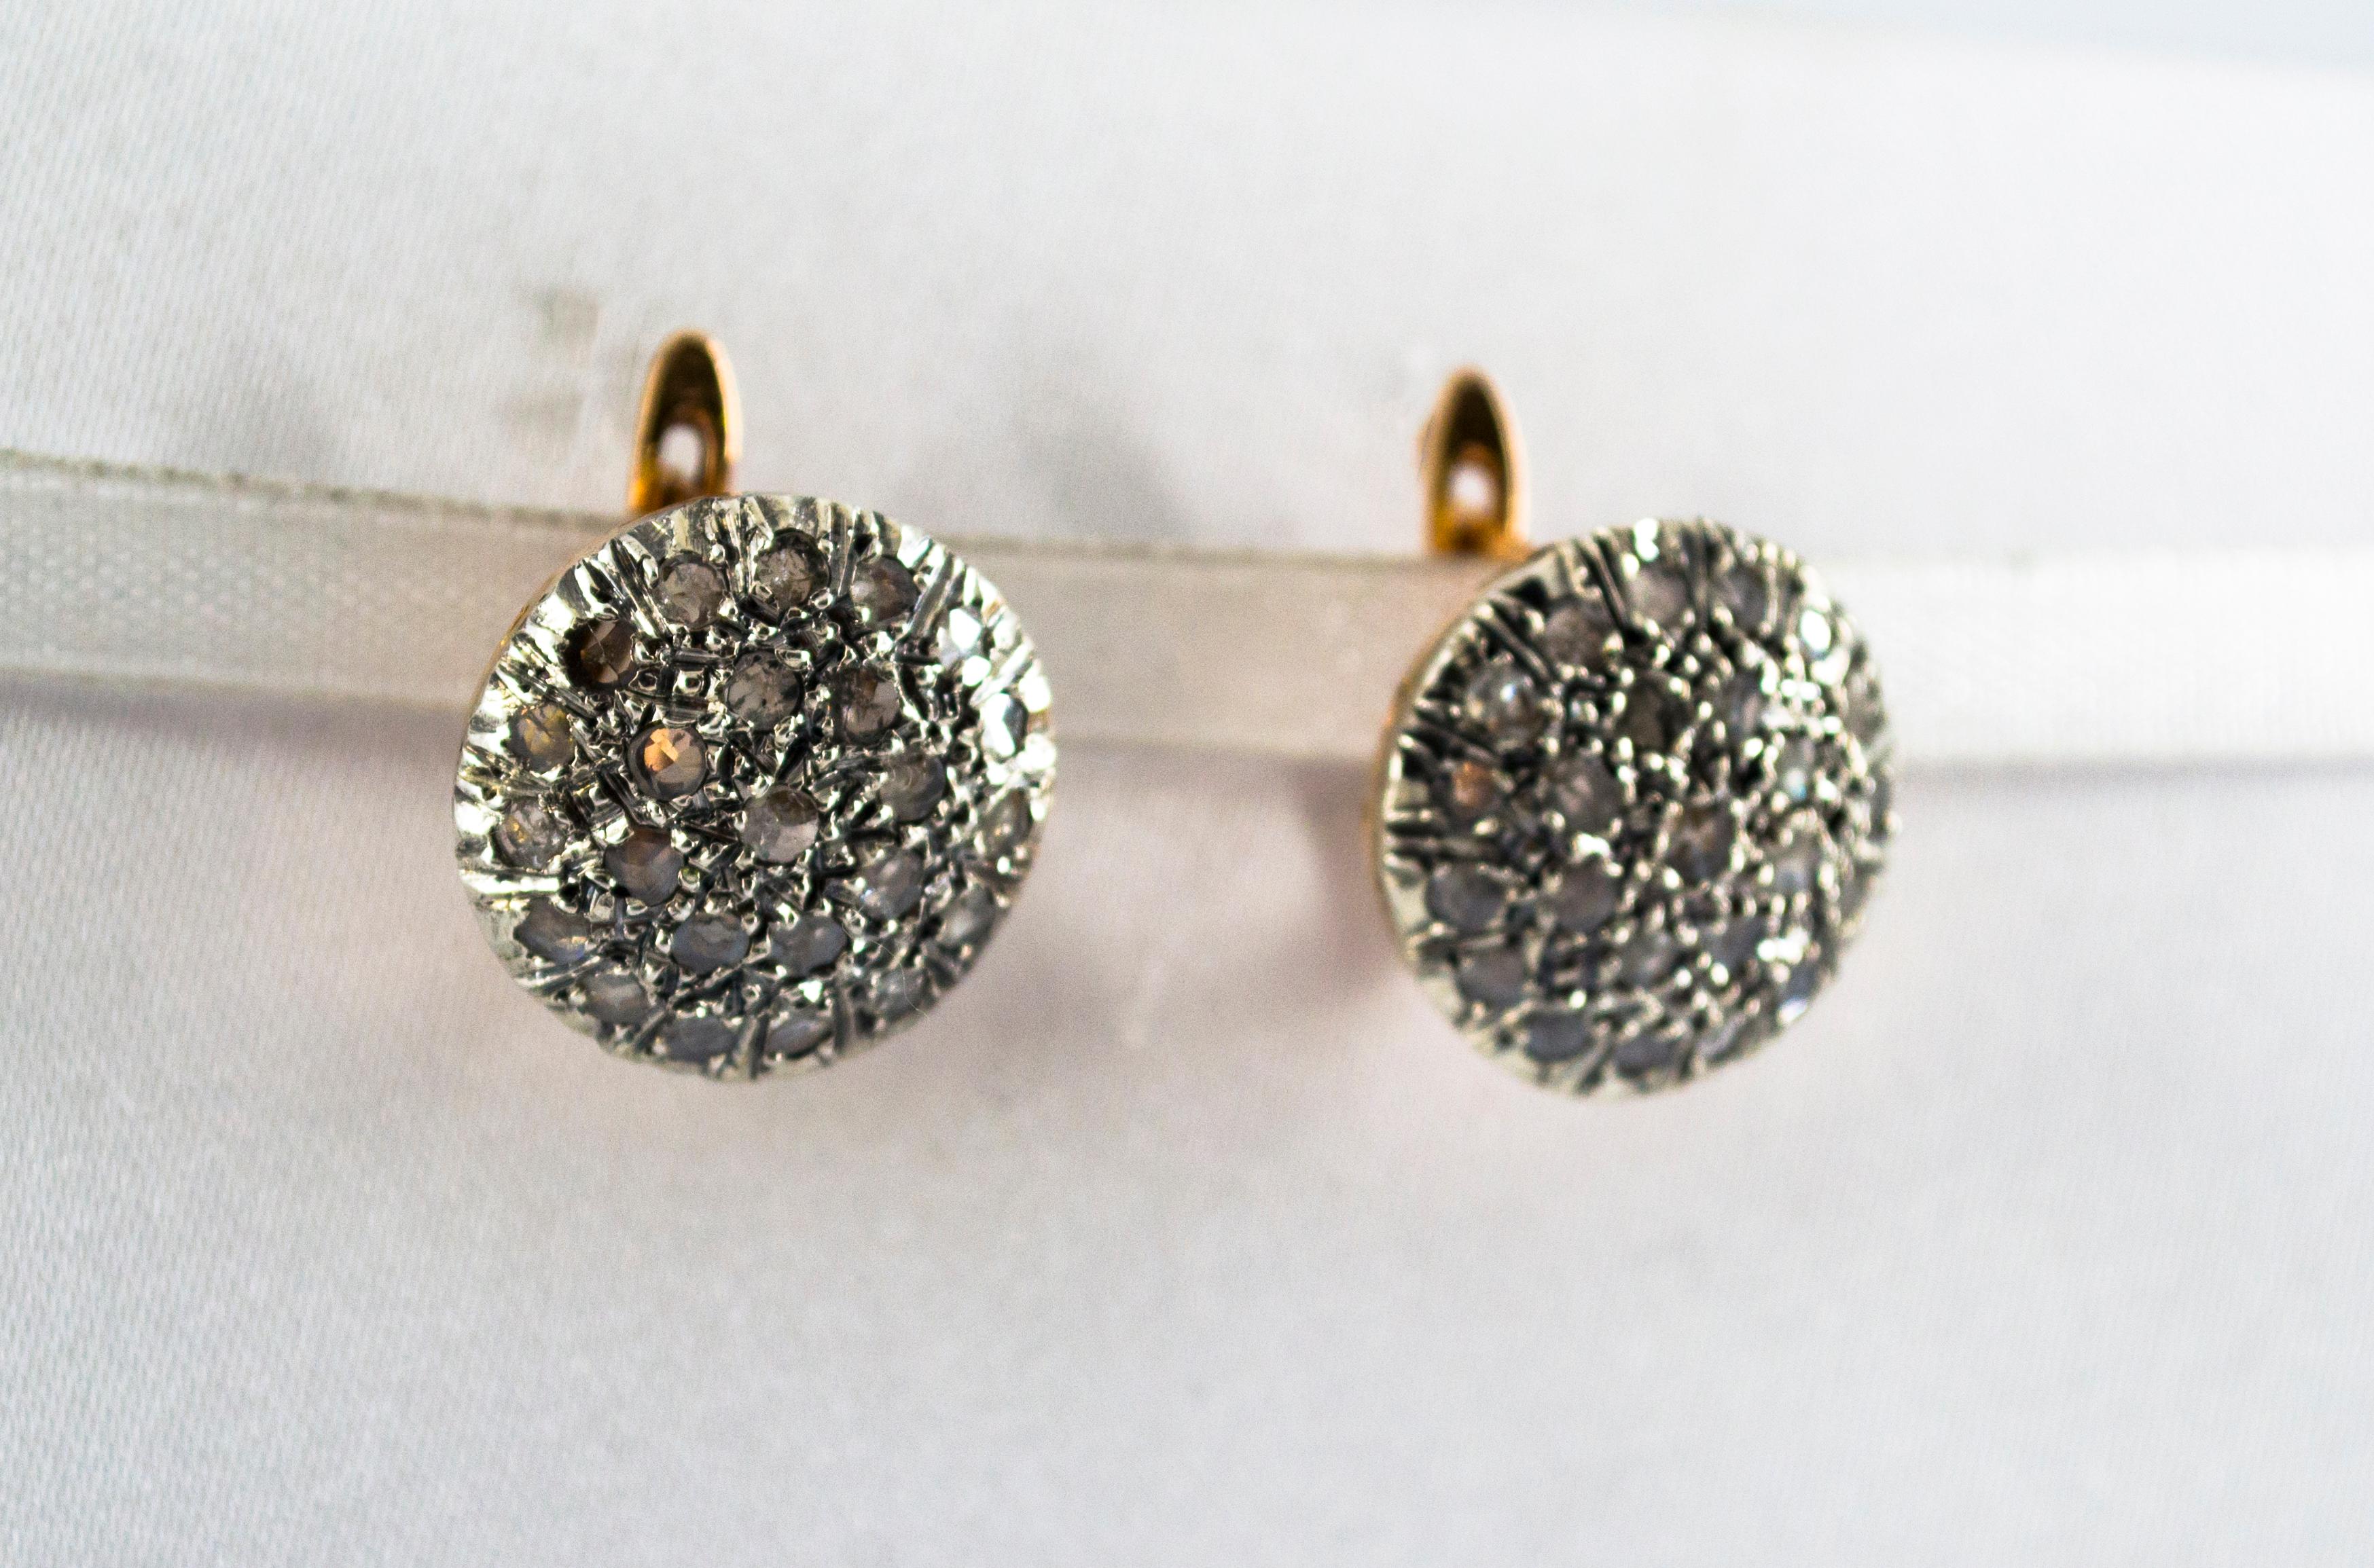 These Earrings are made of 9K Yellow Gold and Sterling Silver.
These Earrings have 1.20 Carats of White Rose Cut Diamonds.
These Earrings are inspired by Art Deco.

All our Earrings have pins for pierced ears but we can change the closure and make